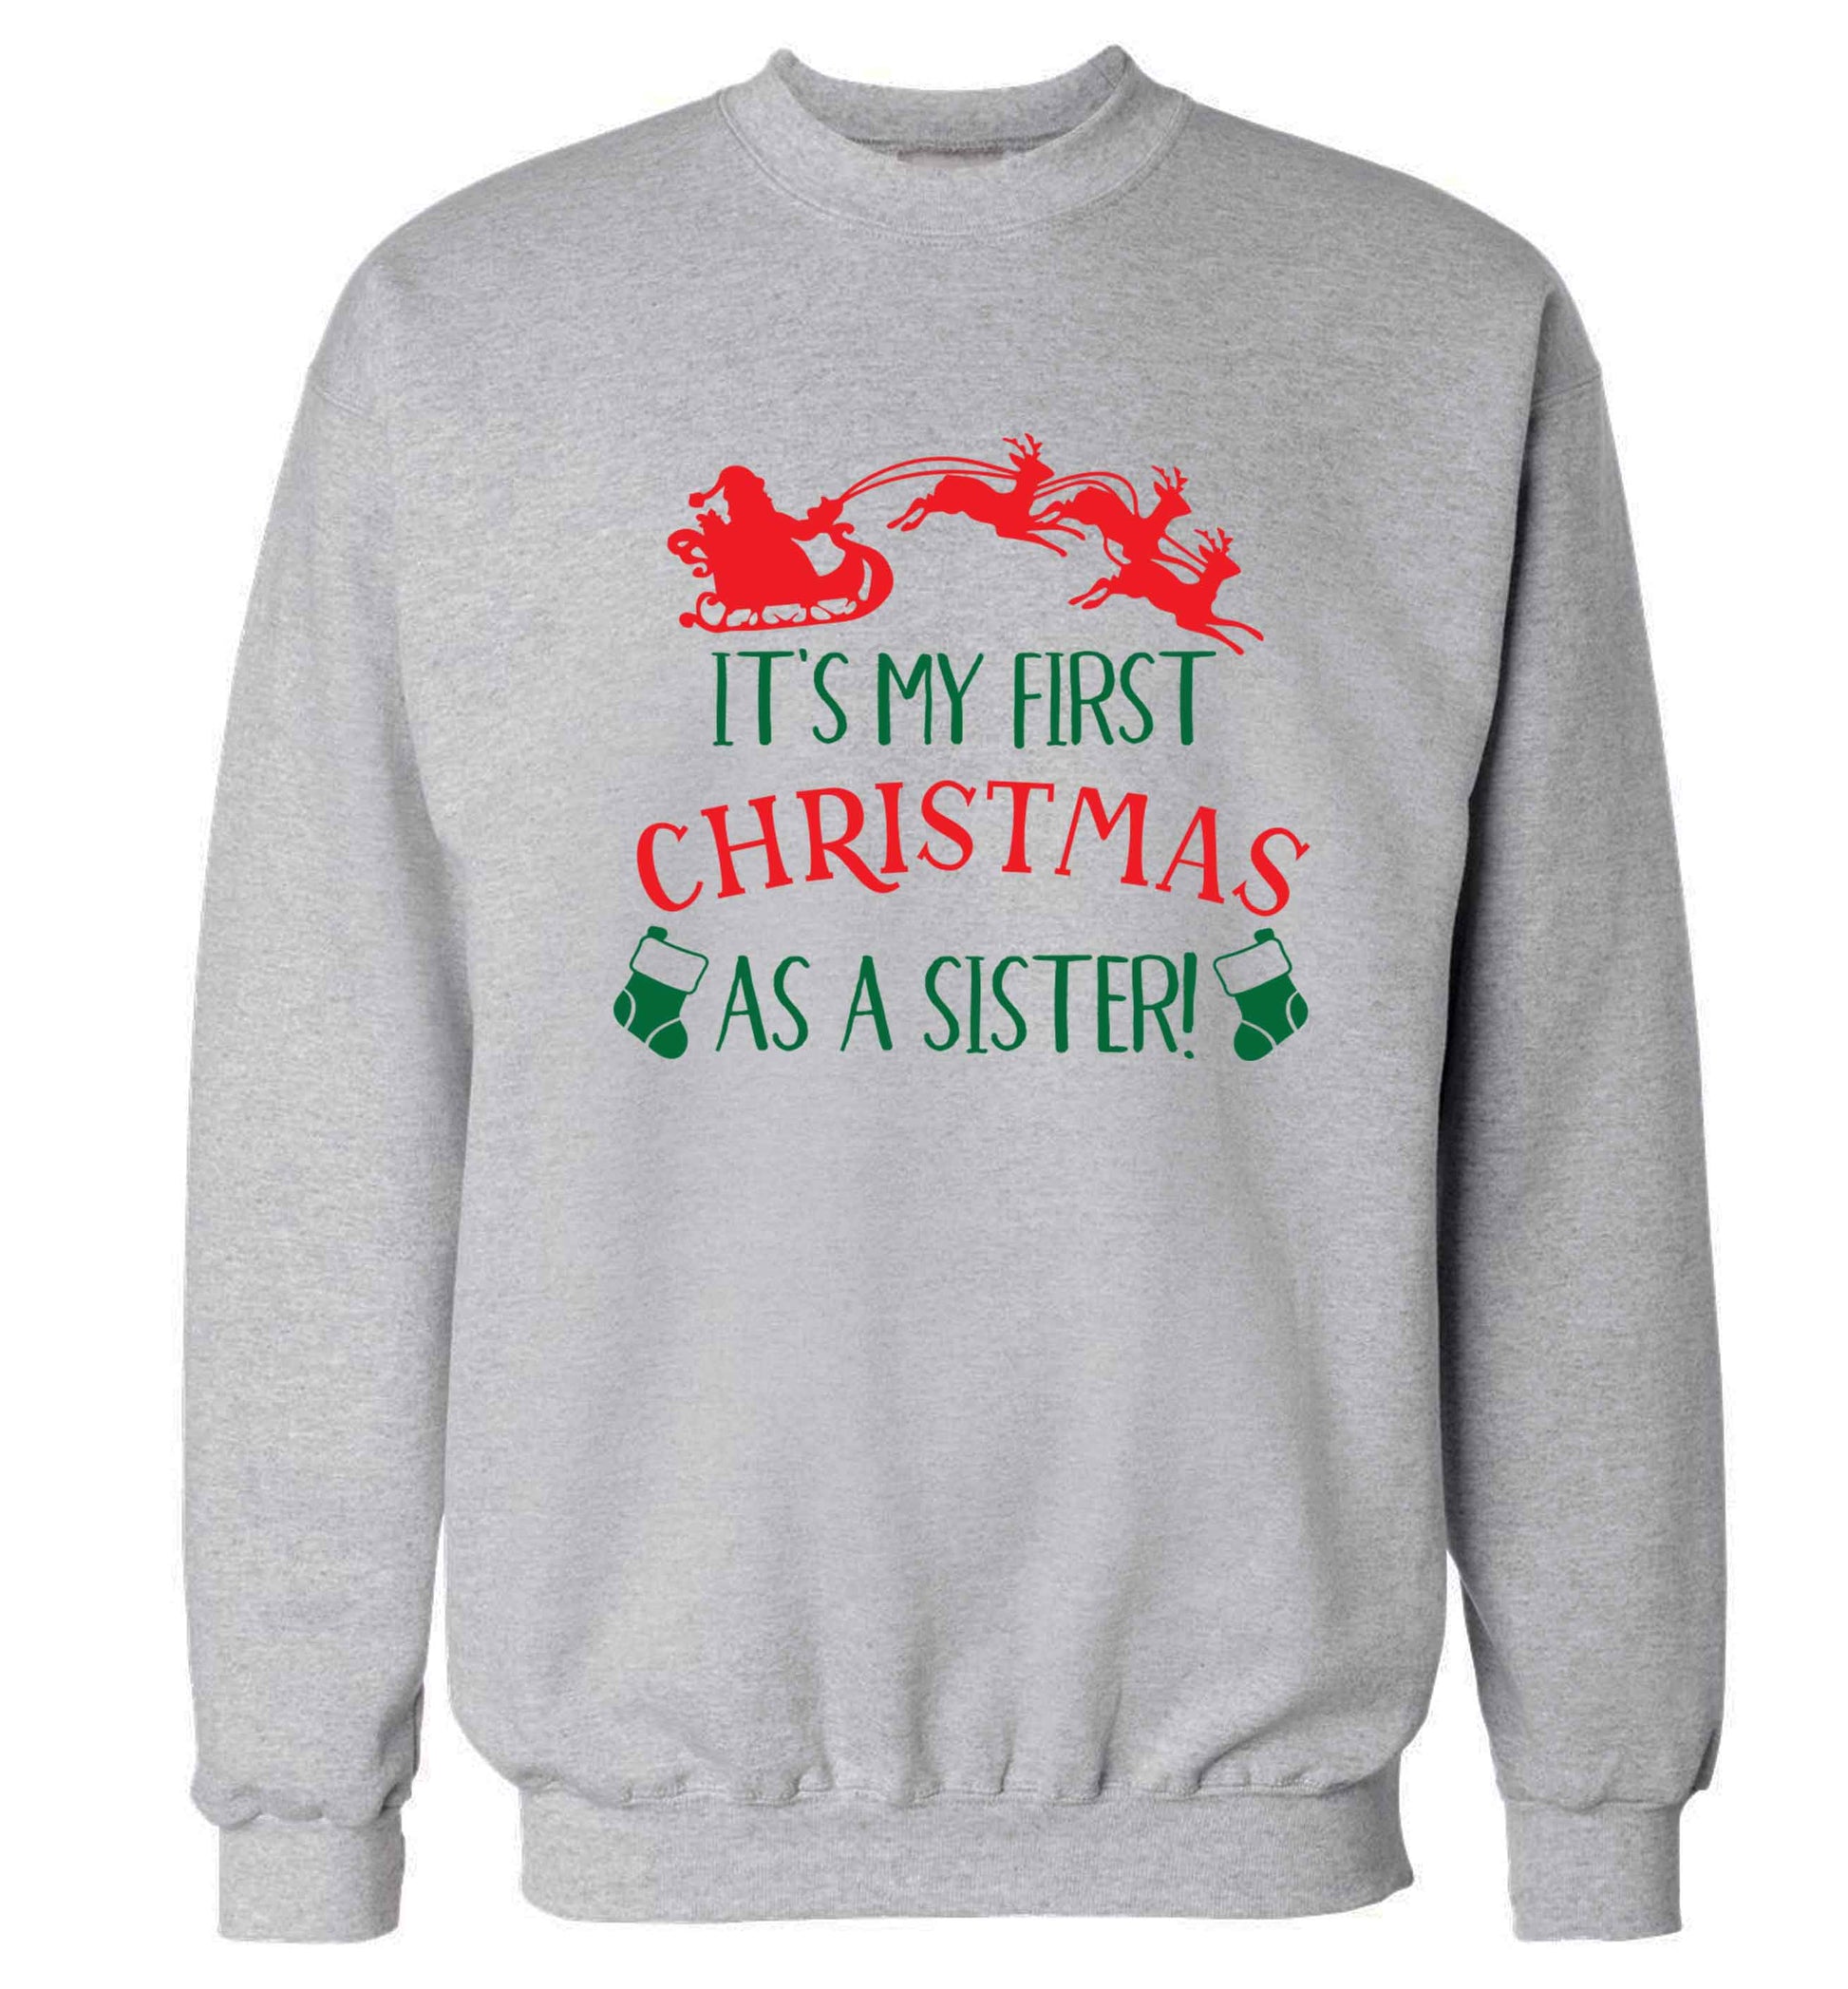 It's my first Christmas as a sister! Adult's unisex grey Sweater 2XL